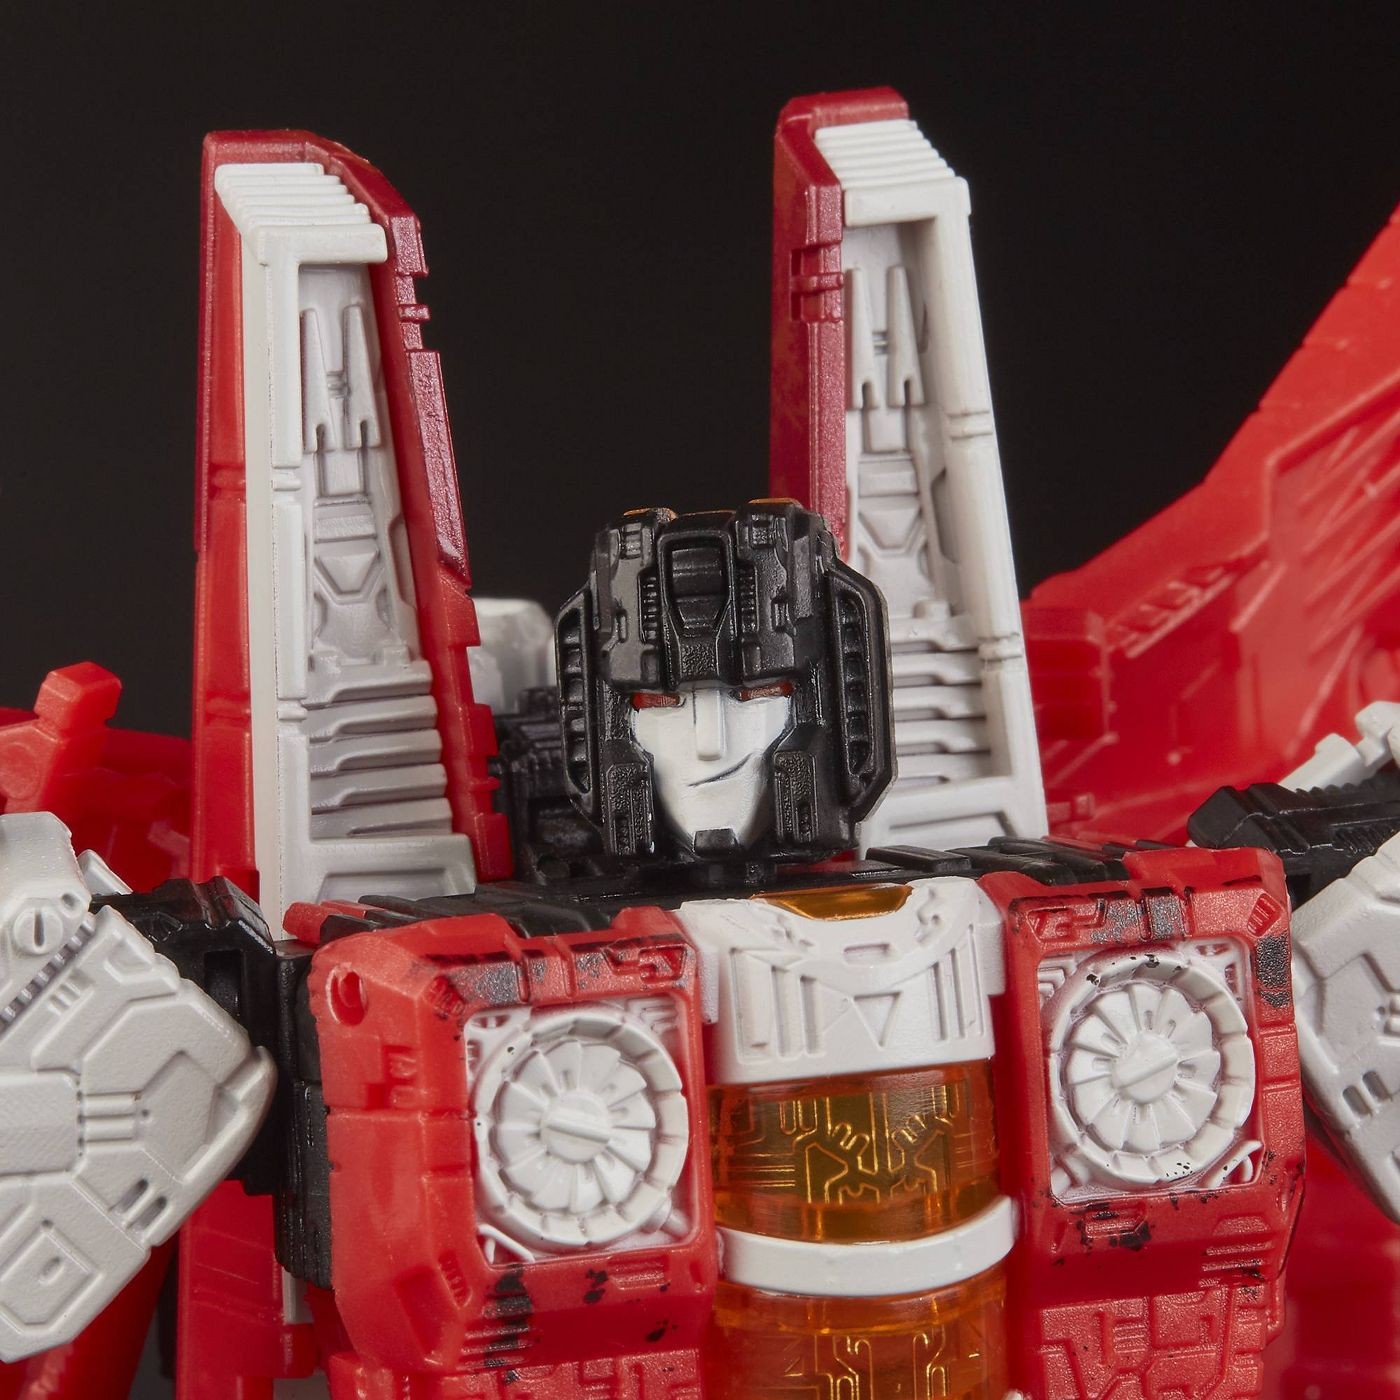 Transformers News: Transformers Selects War for Cybertron Siege Red Wing Back in Stock at Target.com